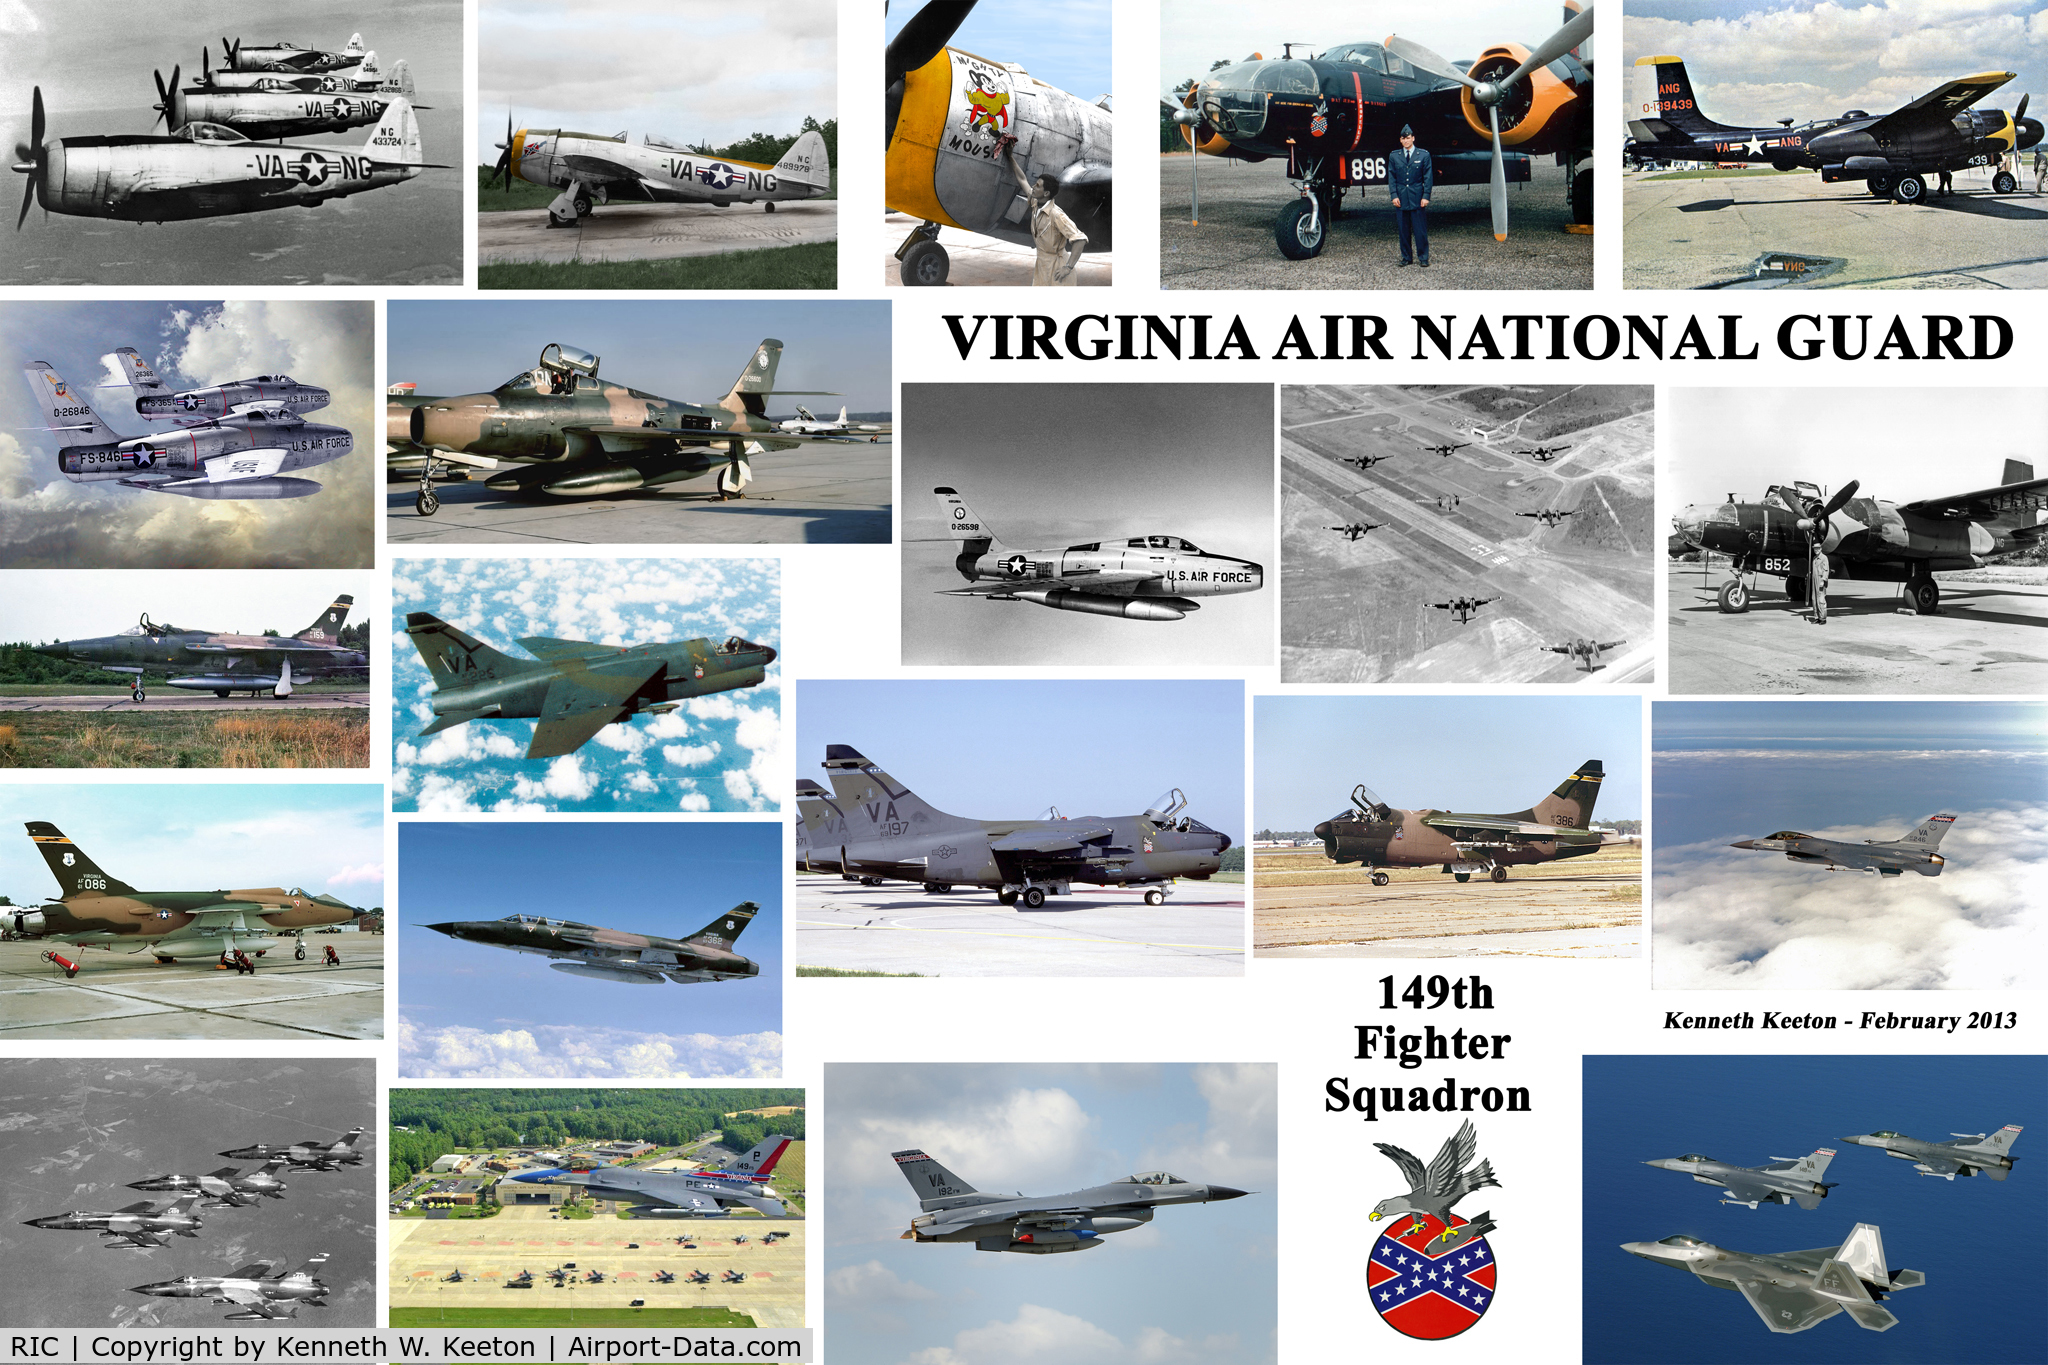 Richmond International Airport (RIC) - RIC, Richmond International Airport, Byrd Field, Richmond, Virginia.
The Virginia Air National Guard, 149th Fighter Squadron, was based at RIC (Byrd Field) for 60 years. 1947-2007.
This collage shows the VA-ANG through the years.  Have permission to use